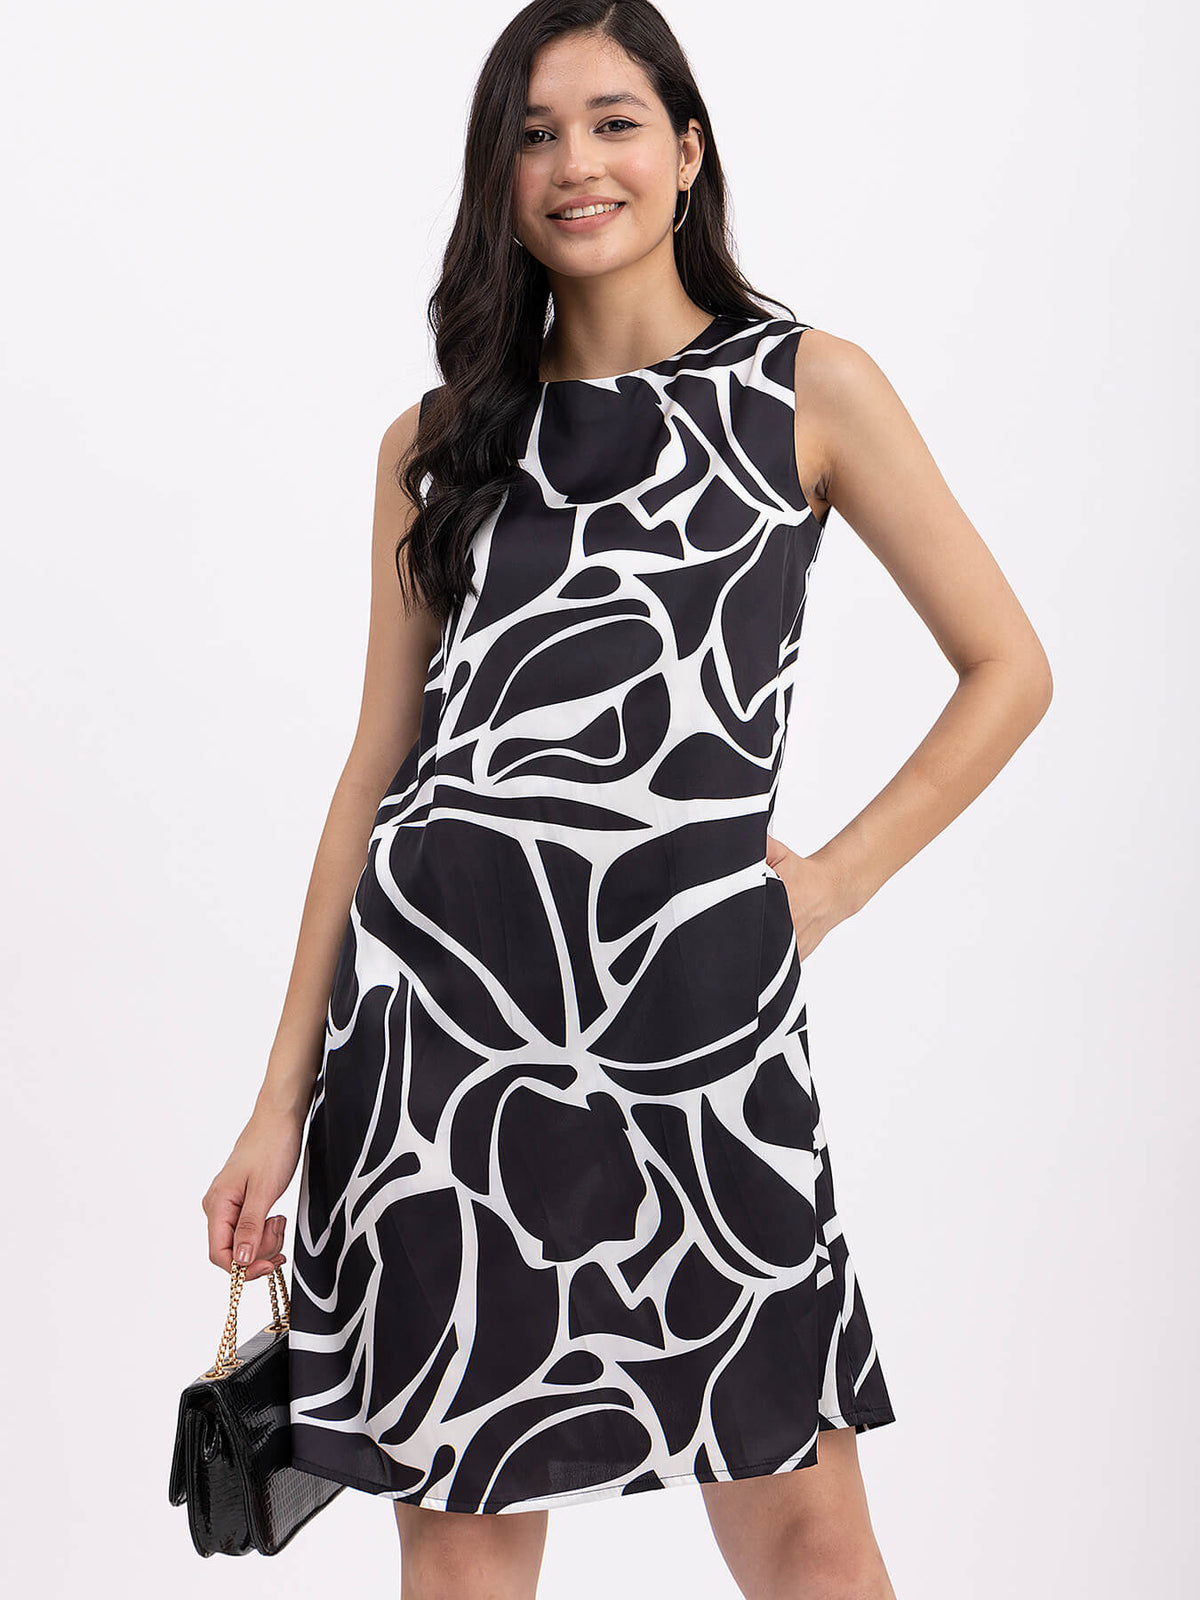 Satin Floral A Line Dress - Black And White